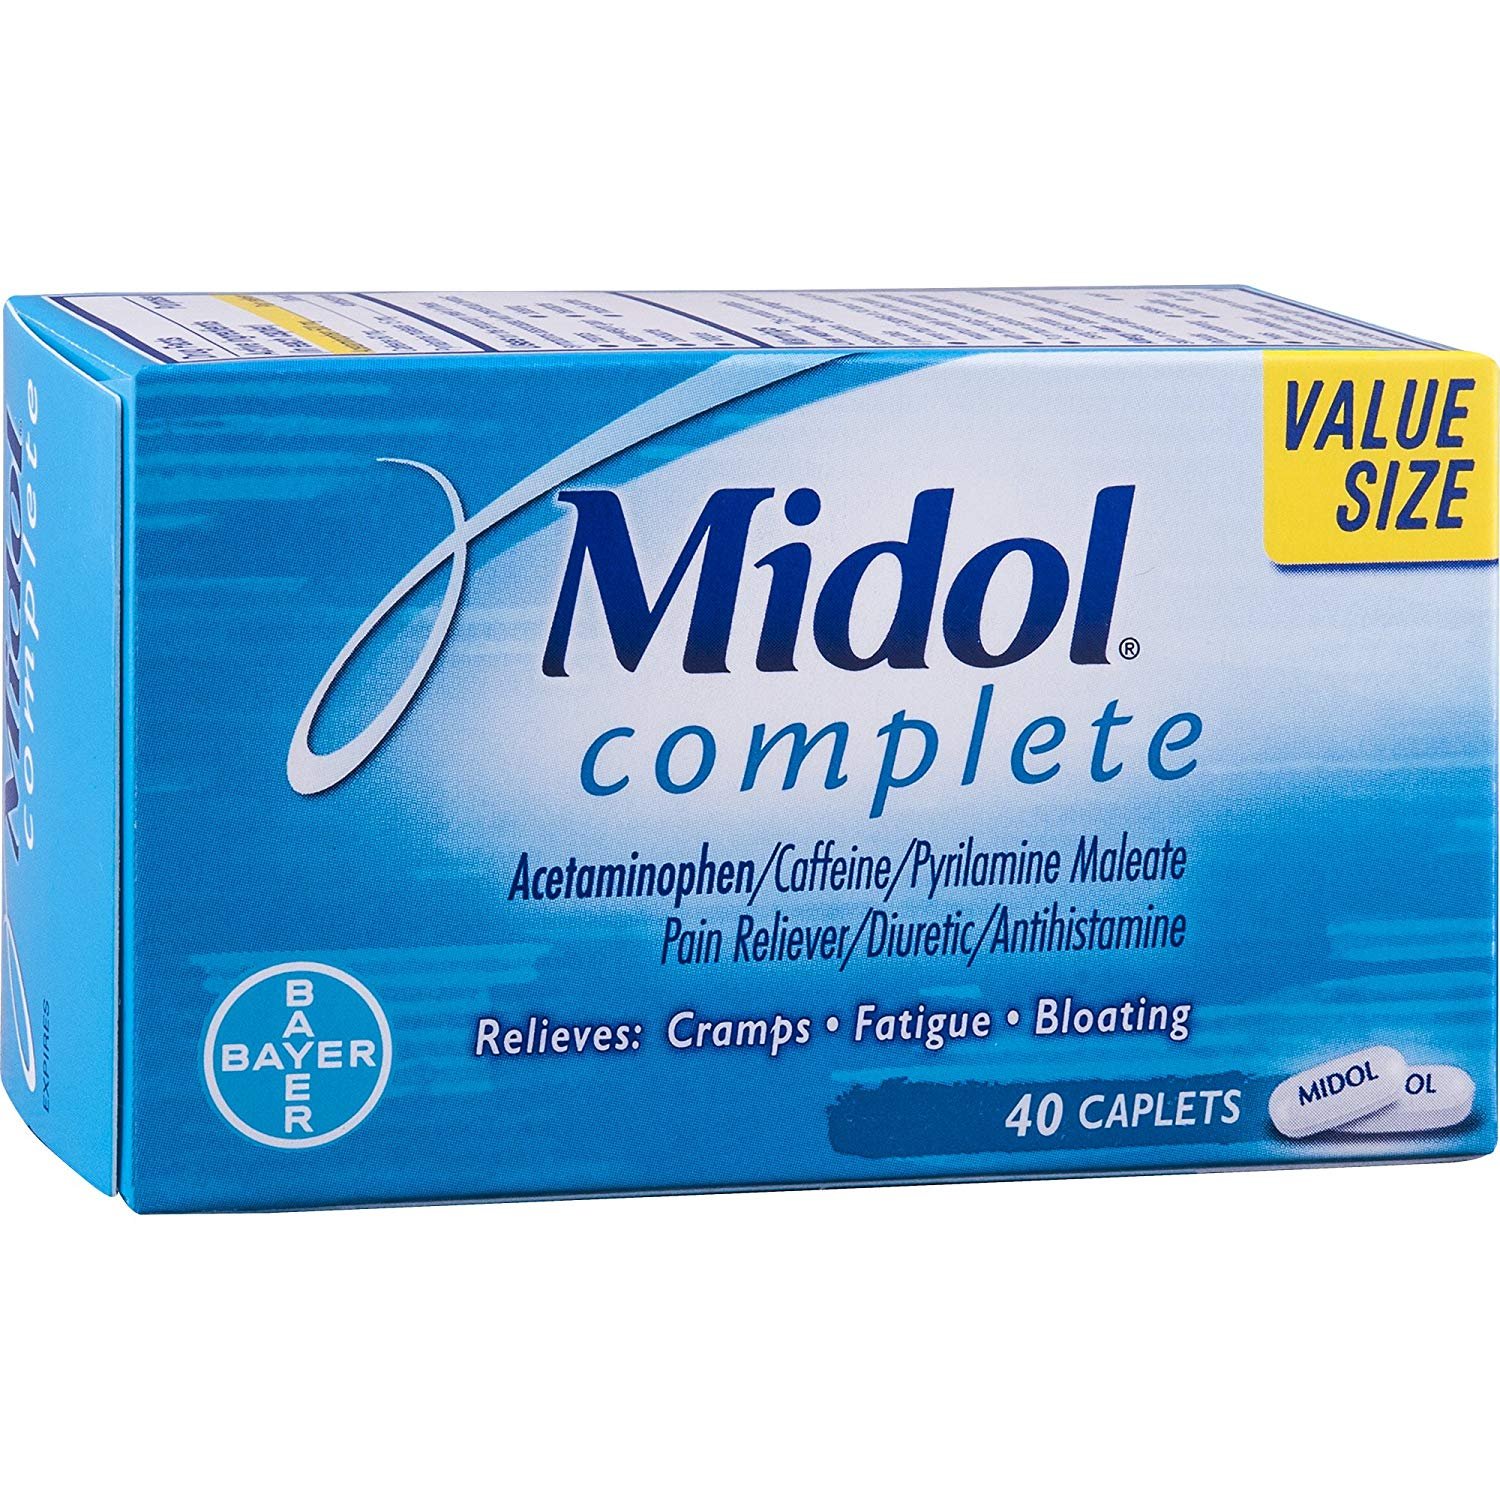 How Many Midol Can I Take? Meds Safety